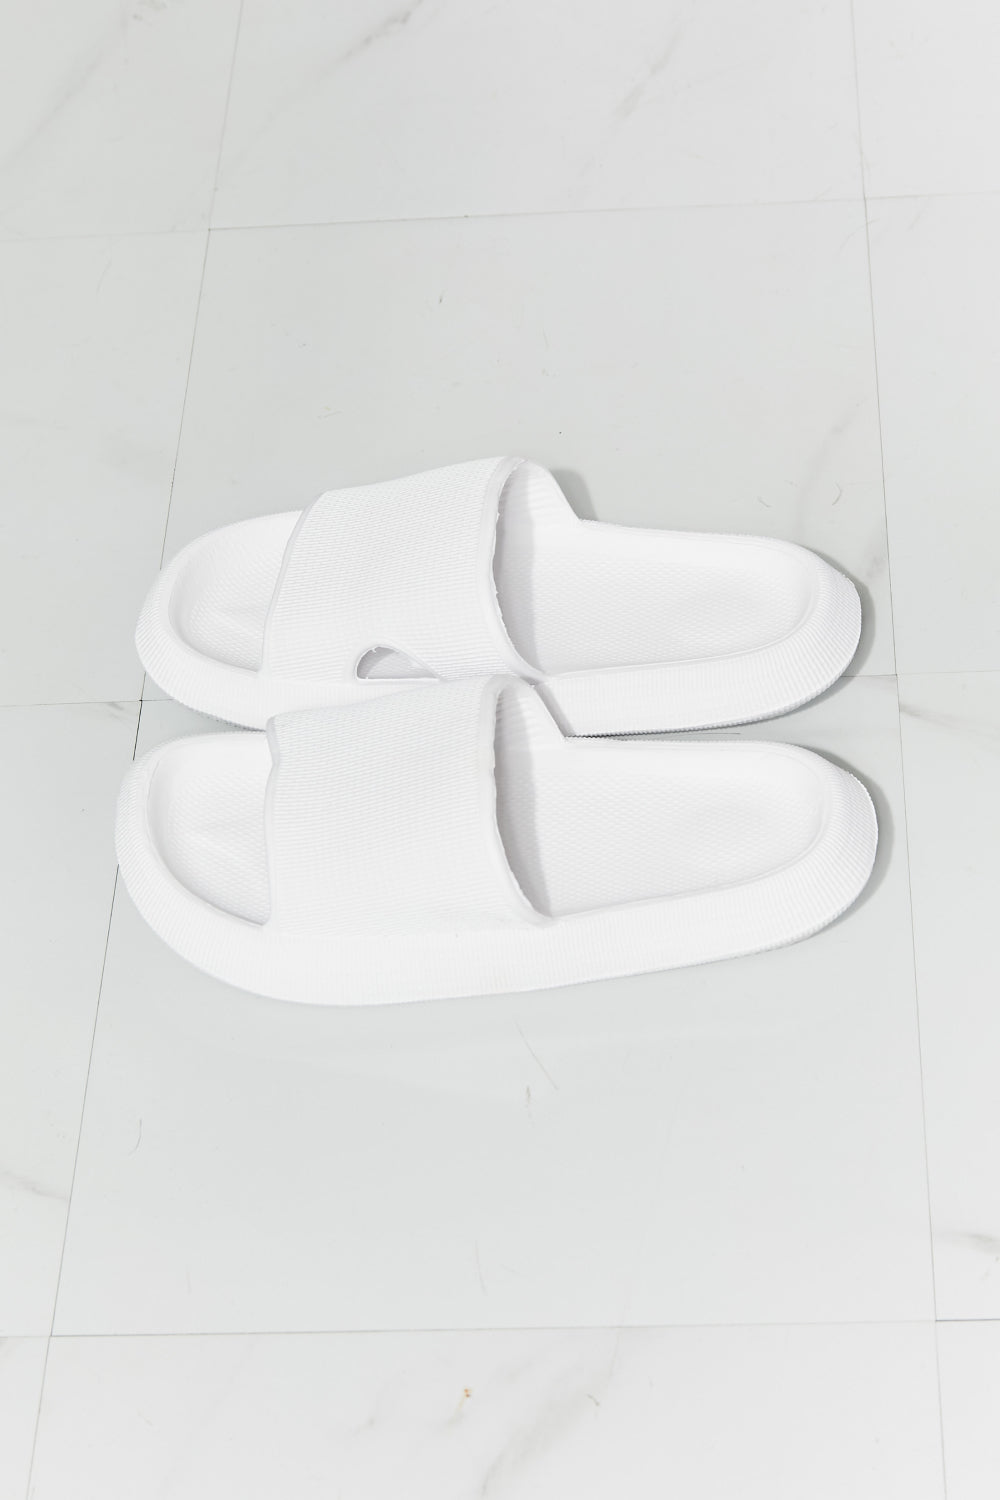 MMShoes Arms Around Me Open Toe Slide in White - T4x Quadruple Love